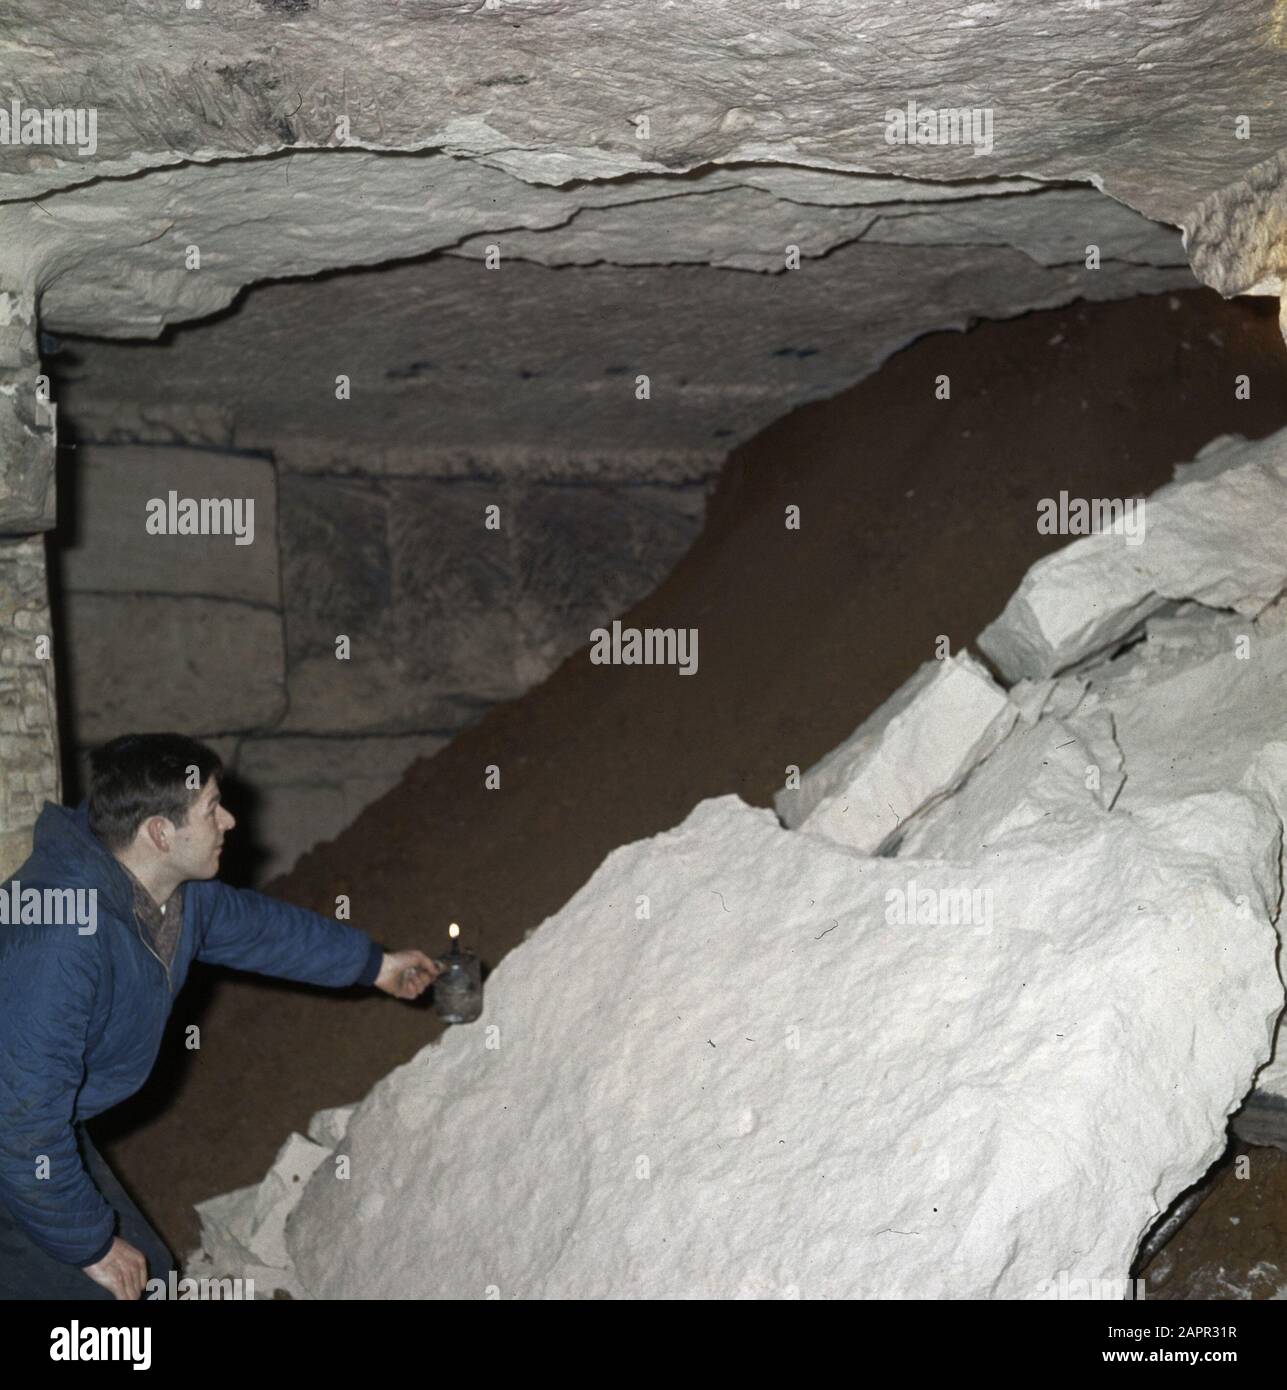 caves, collapses Date: undated Keywords: caves, collapses Institution name: diapositive 6x6 color Stock Photo